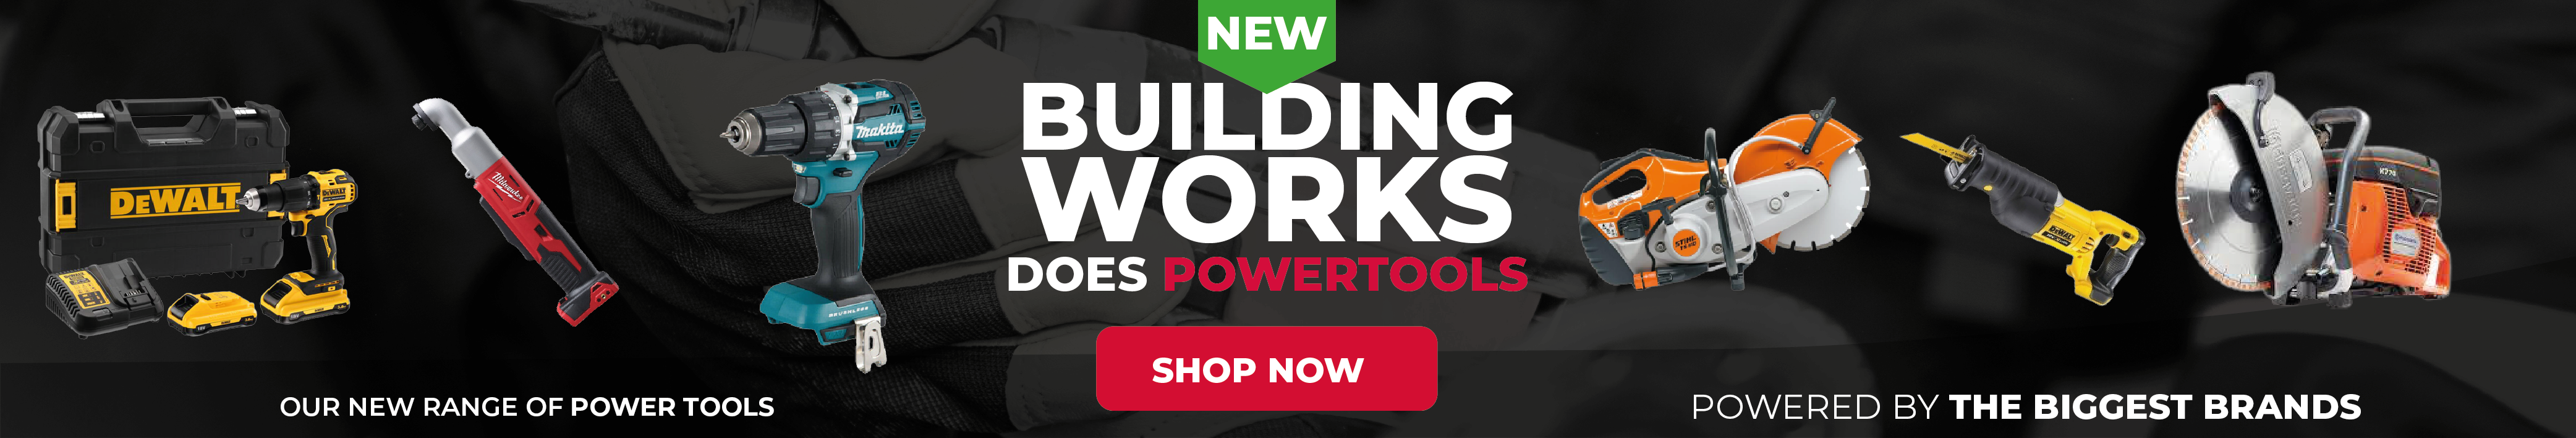 Building Works Power Tools-01